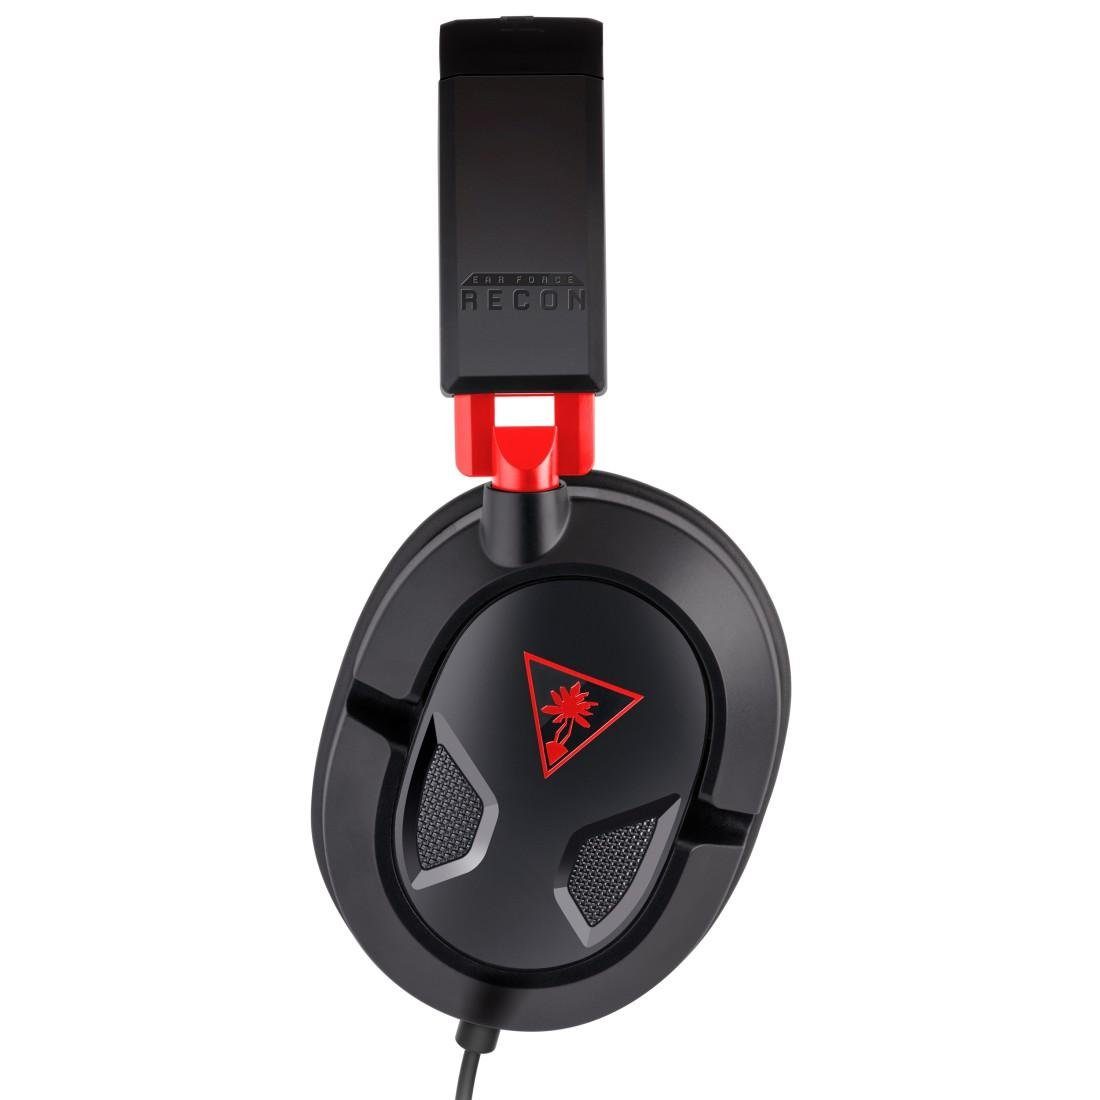 50 Gaming-Headset Recon Turtle Beach